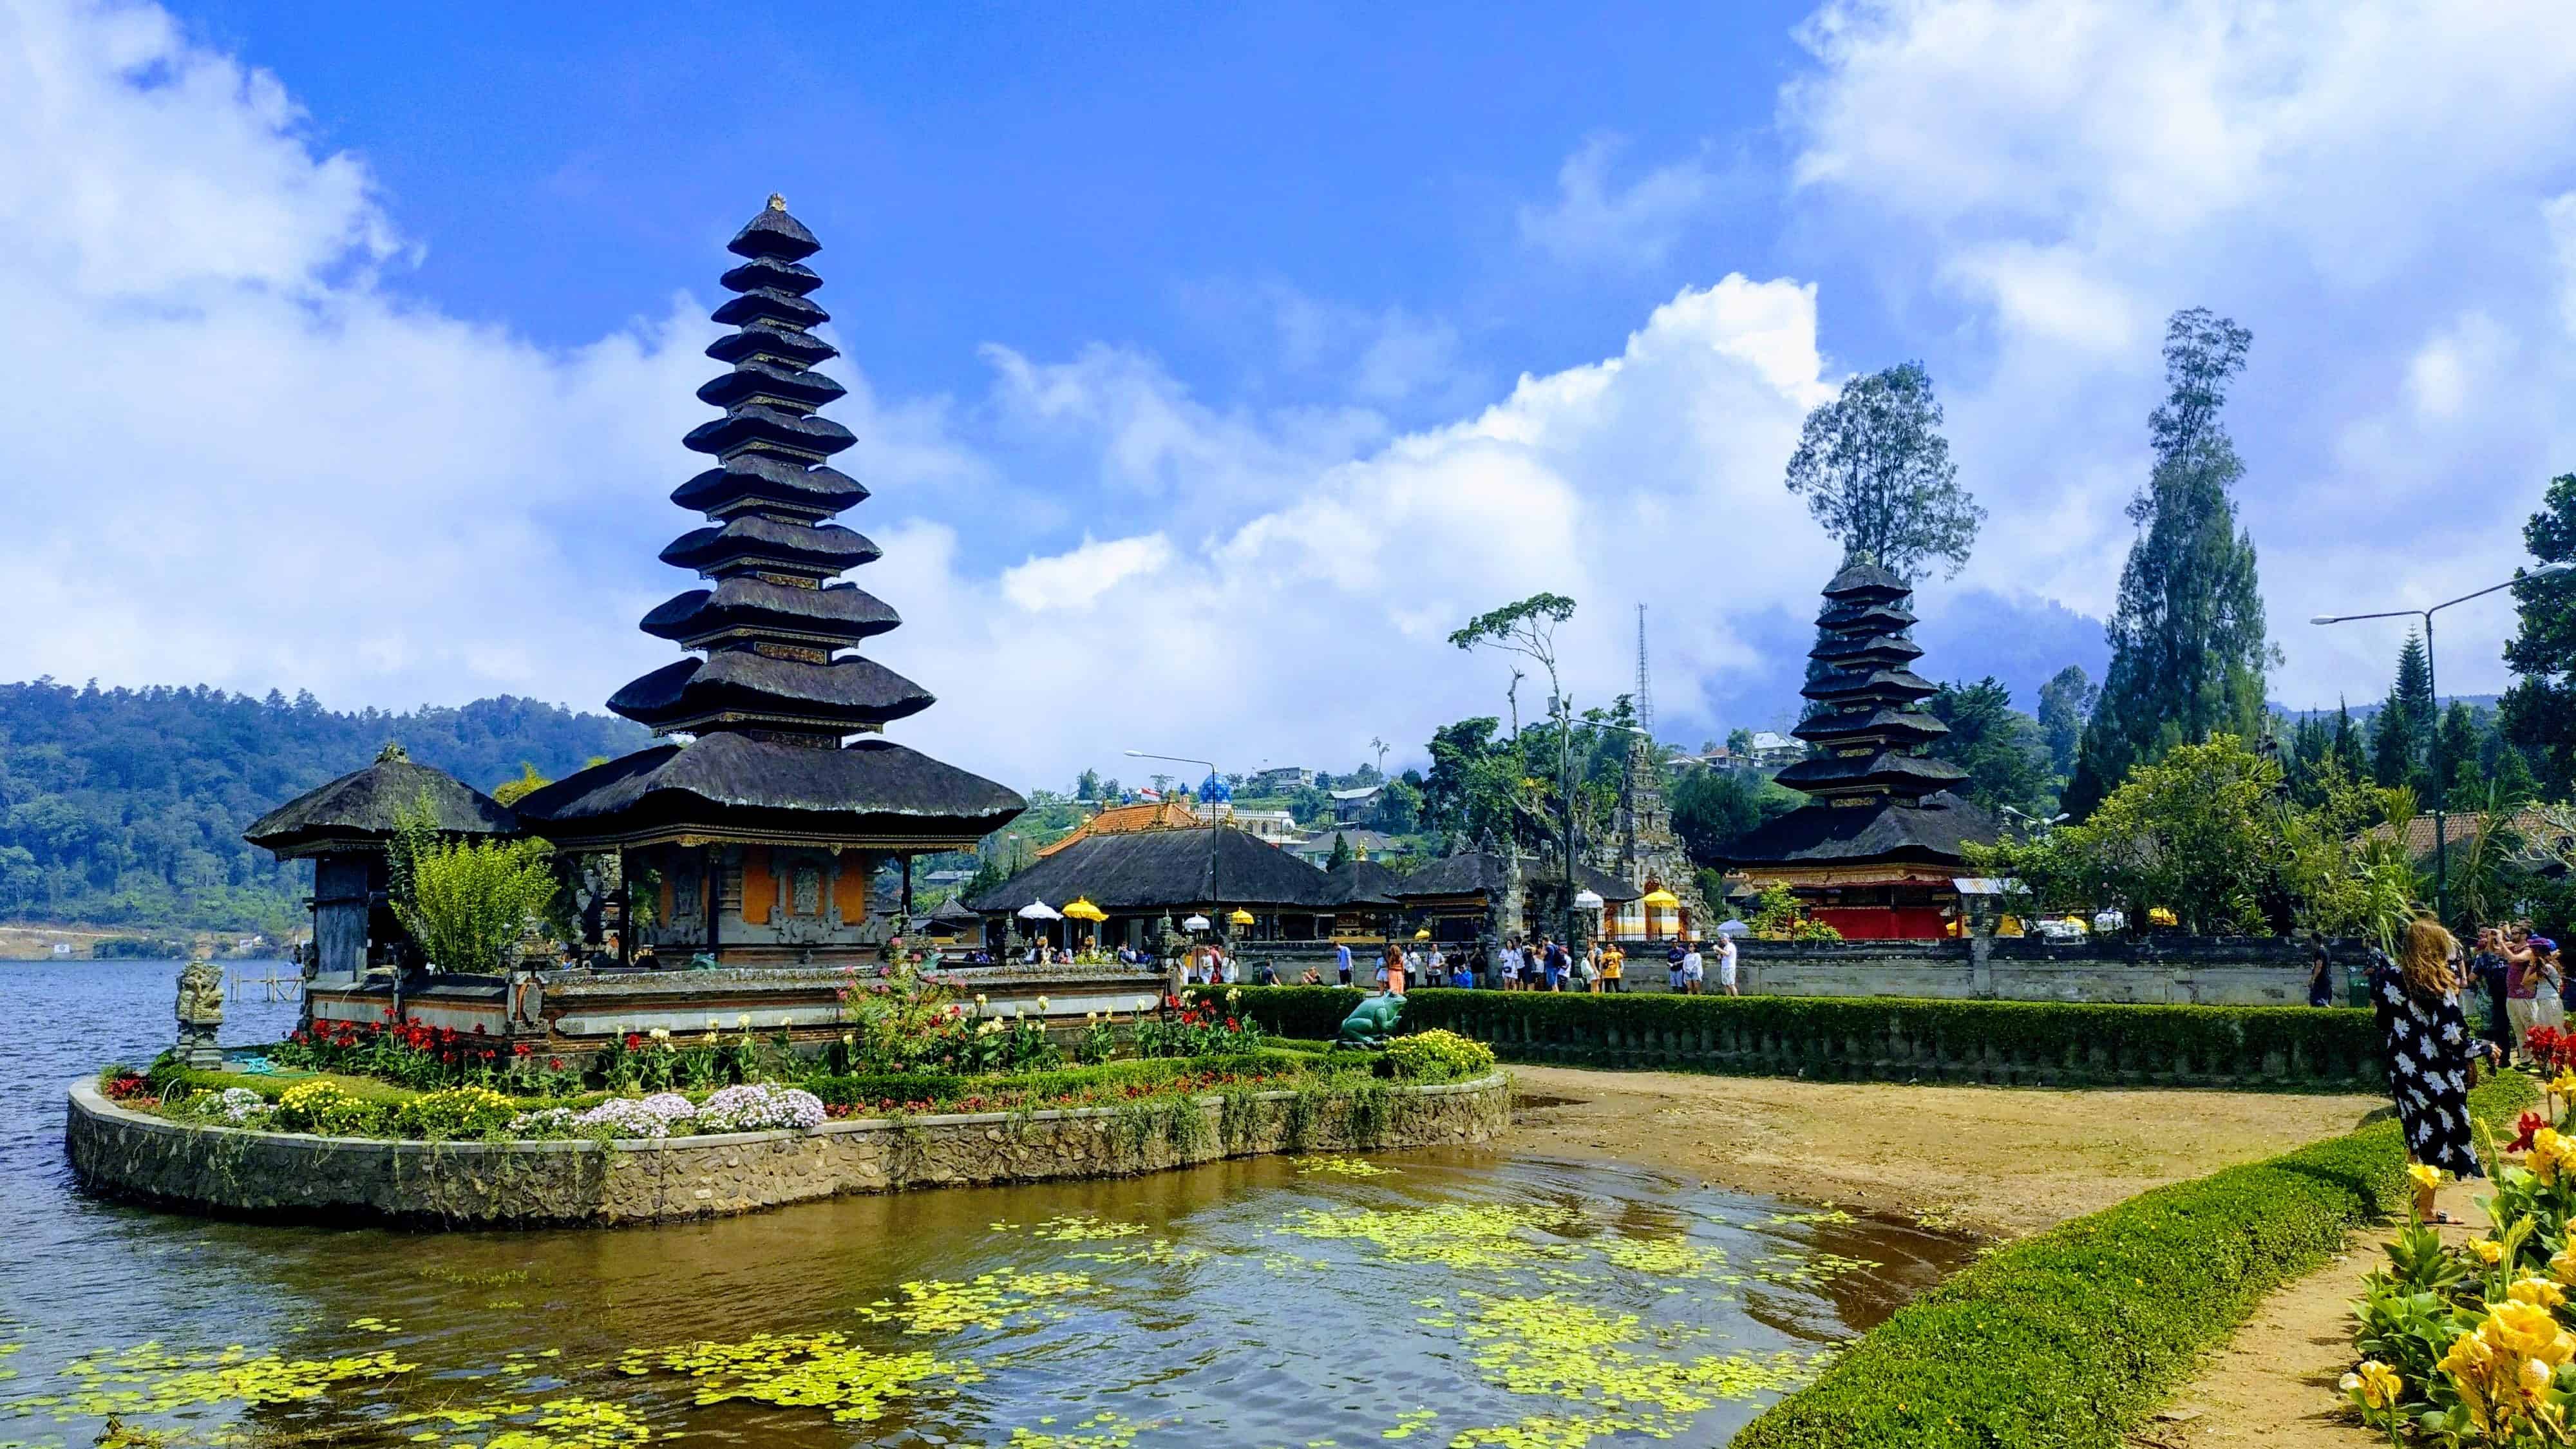 10 Tips for Planning a Trip to Bali or Indonesia